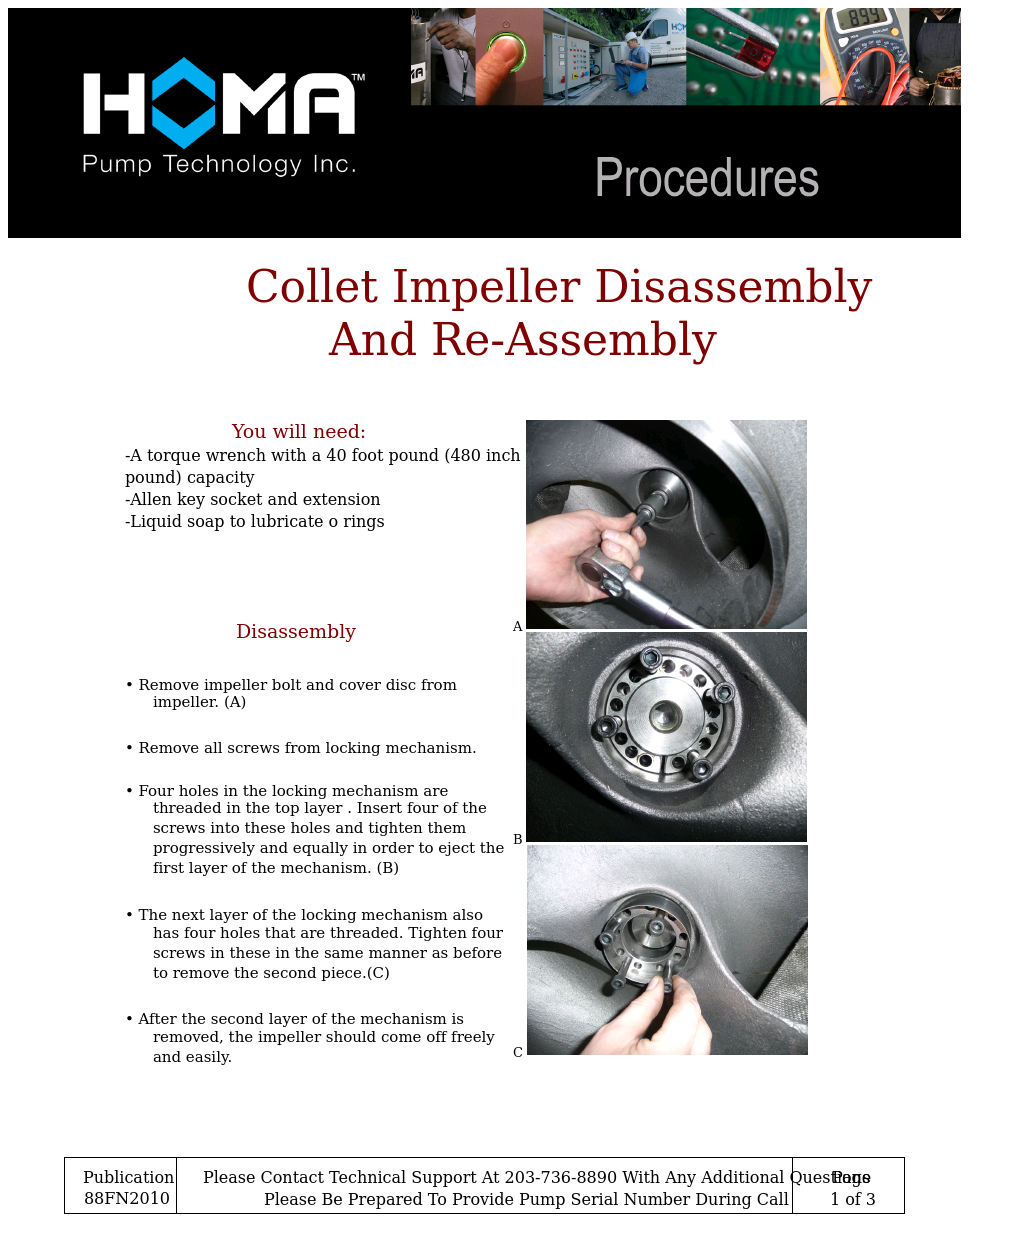 Collet Impeller Disassembly and Installation